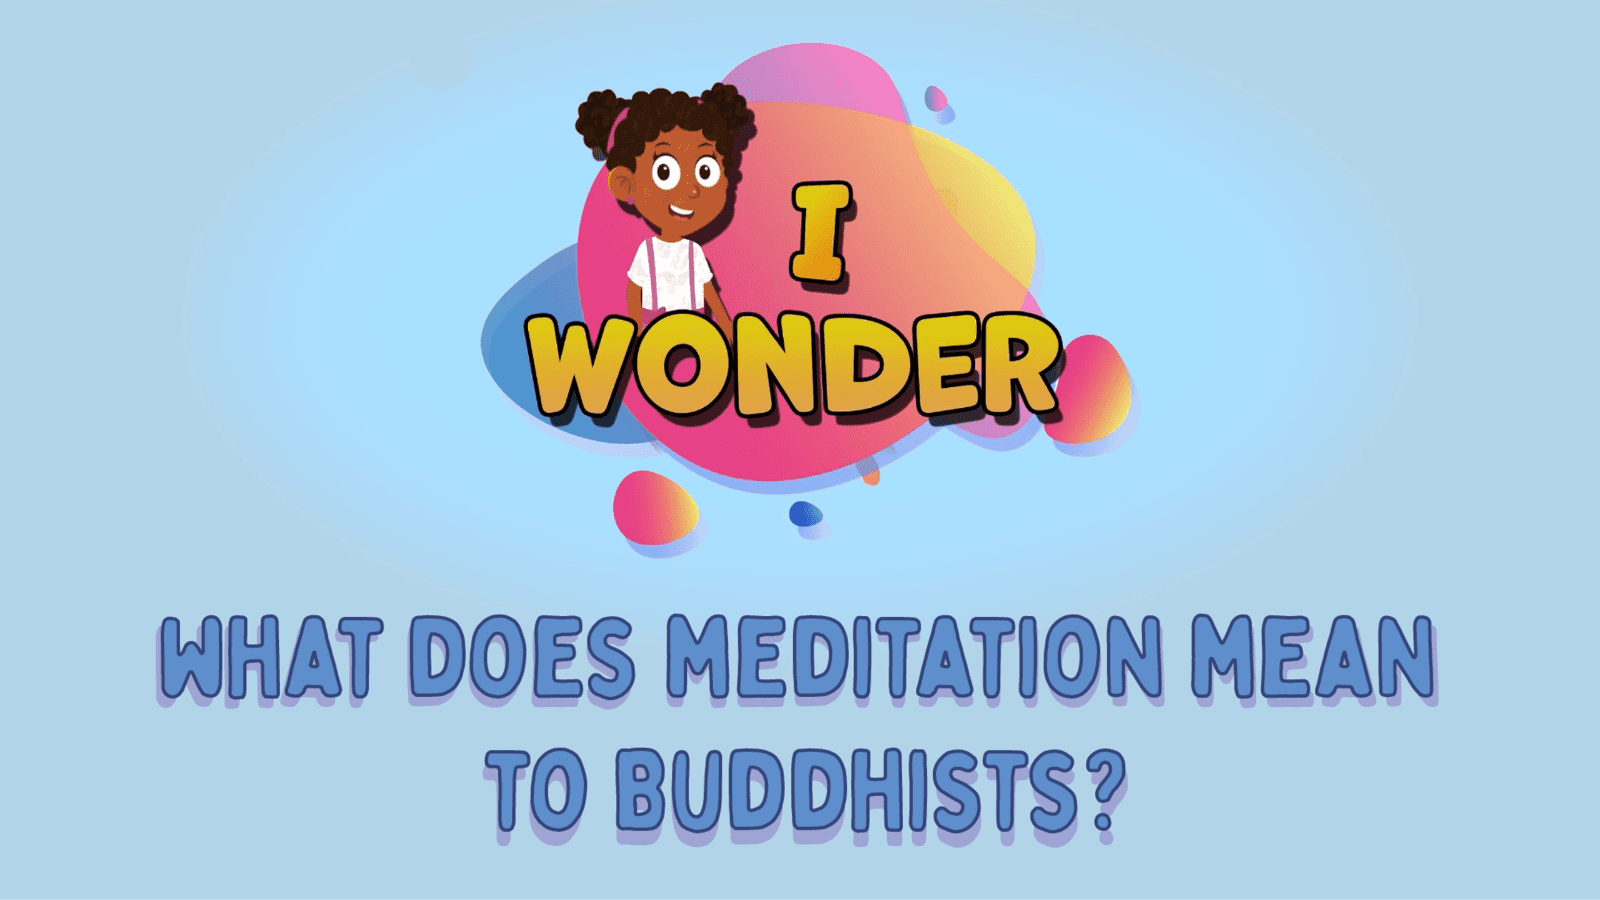 What Does Meditation Mean To Buddhists?